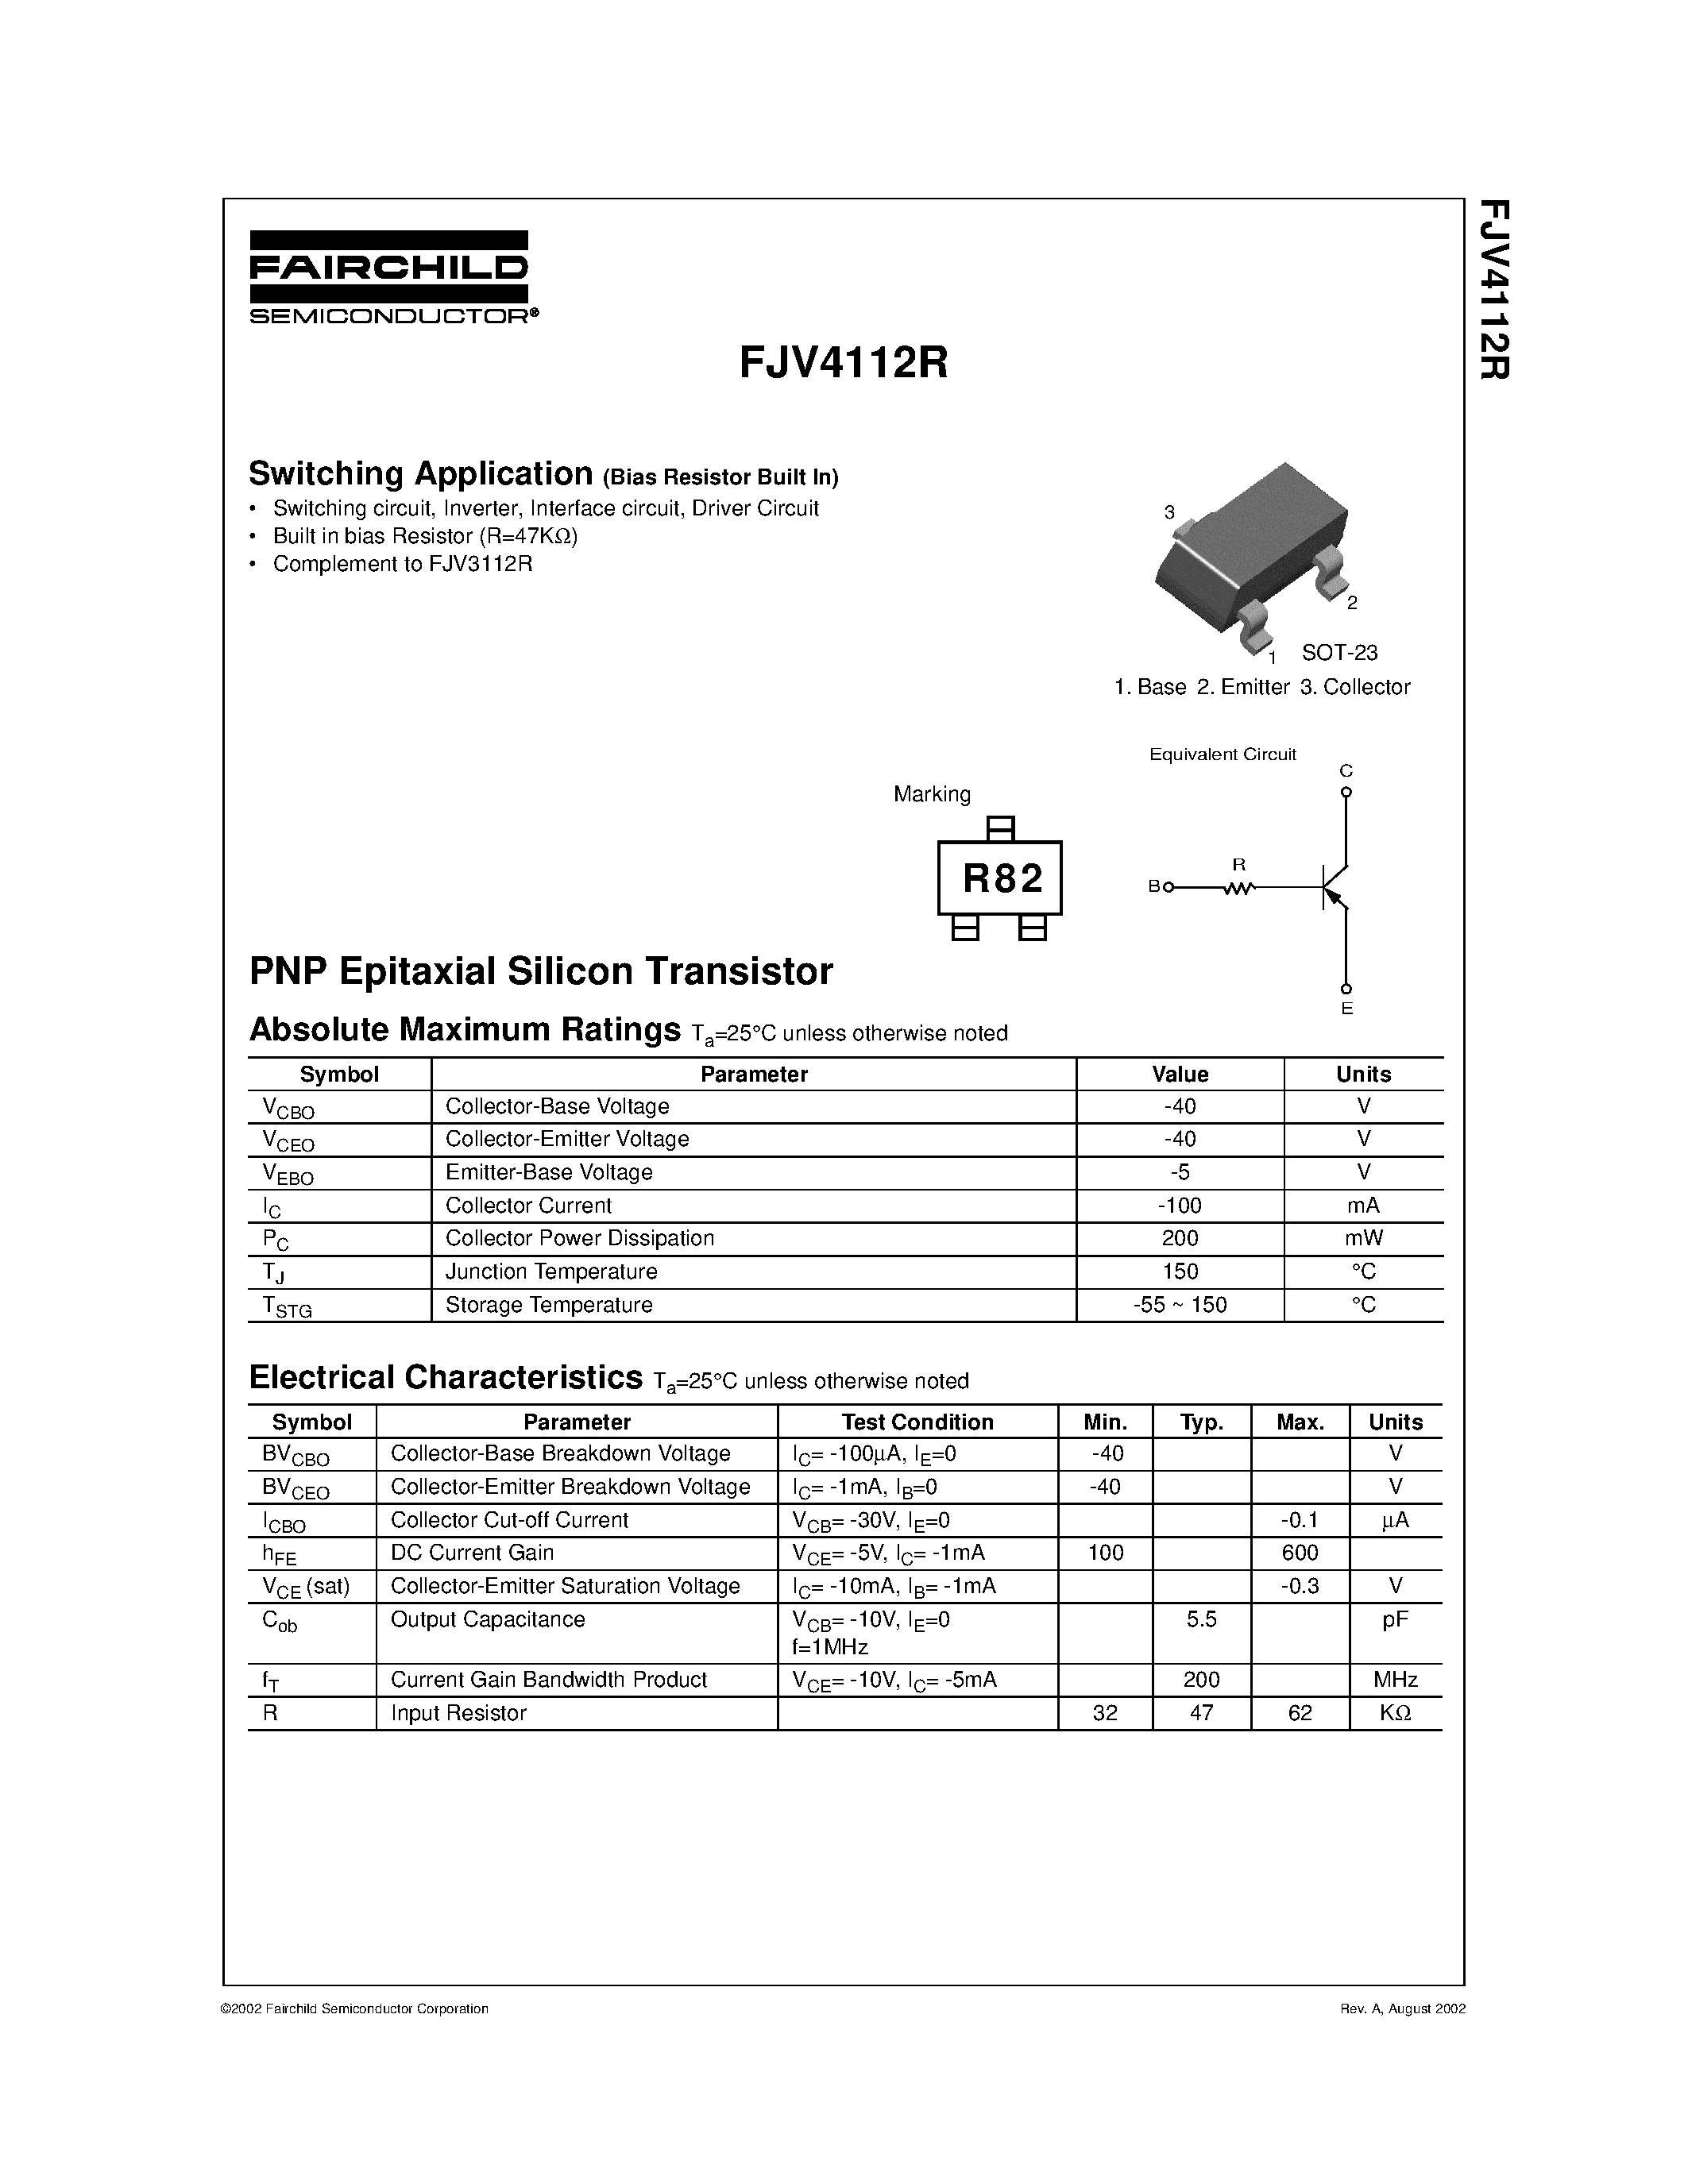 Даташит FJV4112R - PNP Epitaxial Silicon Transistor страница 1